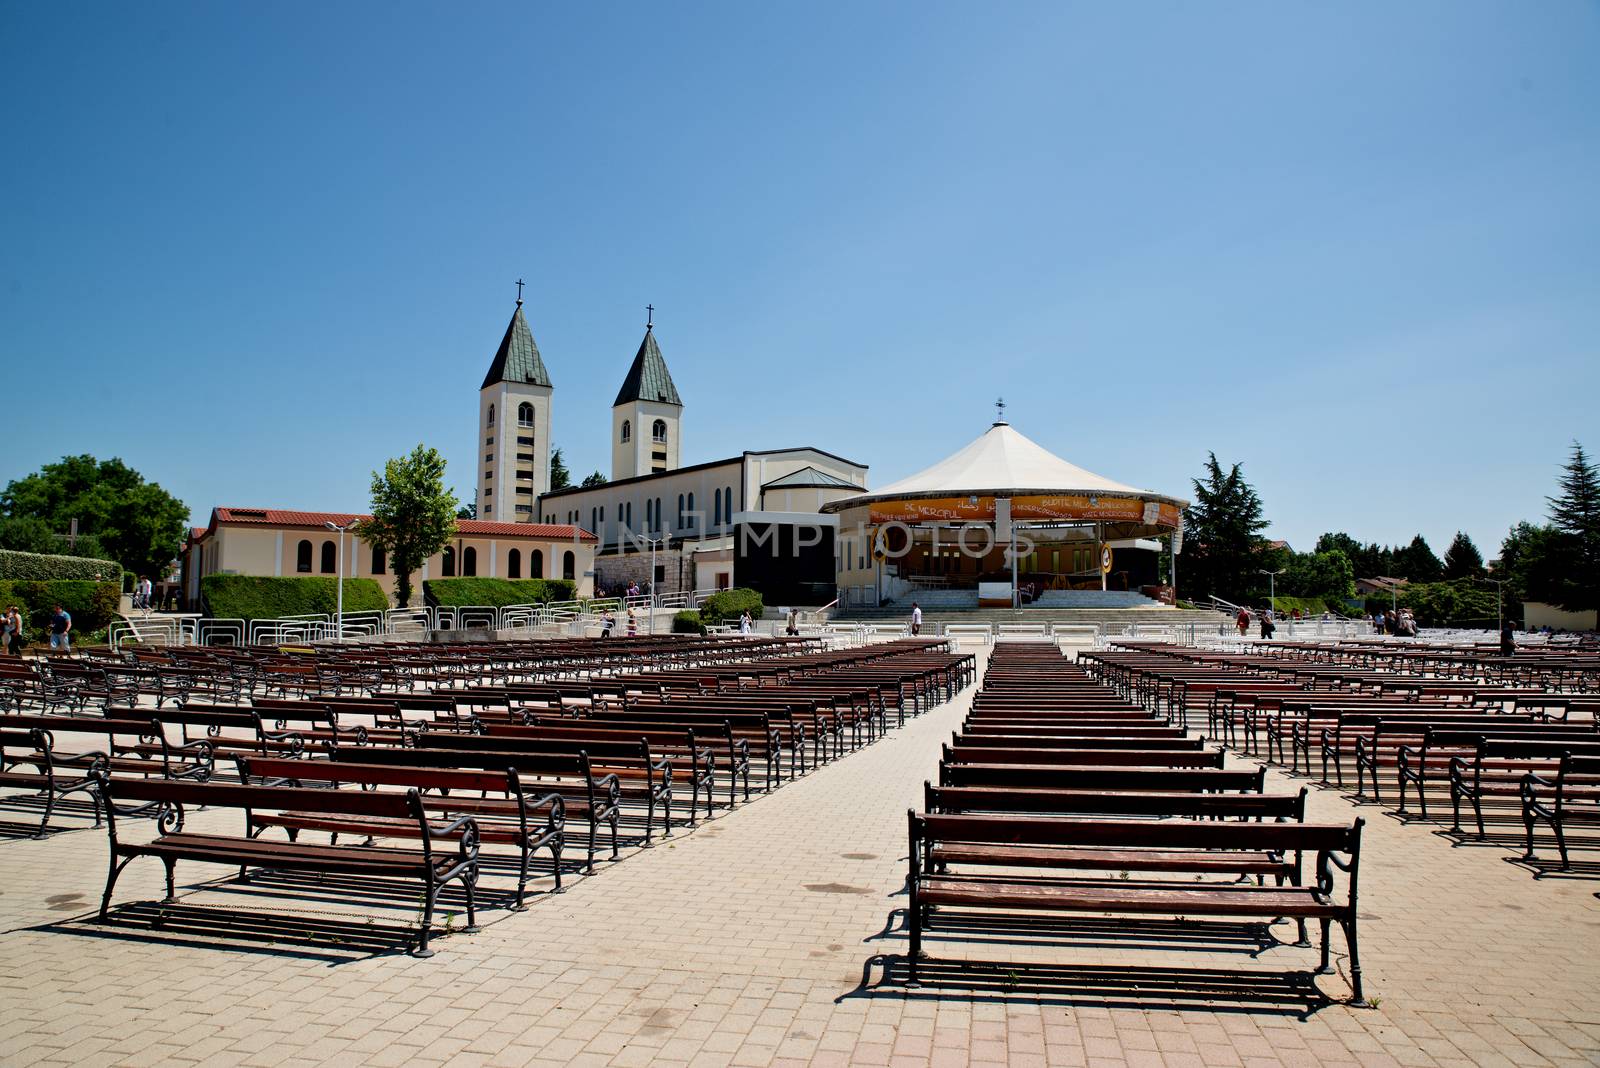 MEDUGORJE, BOSNIA AND HERZEGOVINA - JULY 4, 2016: Benches and altar behind the parish church of St. James, the shrine of Our Lady of Medugorje